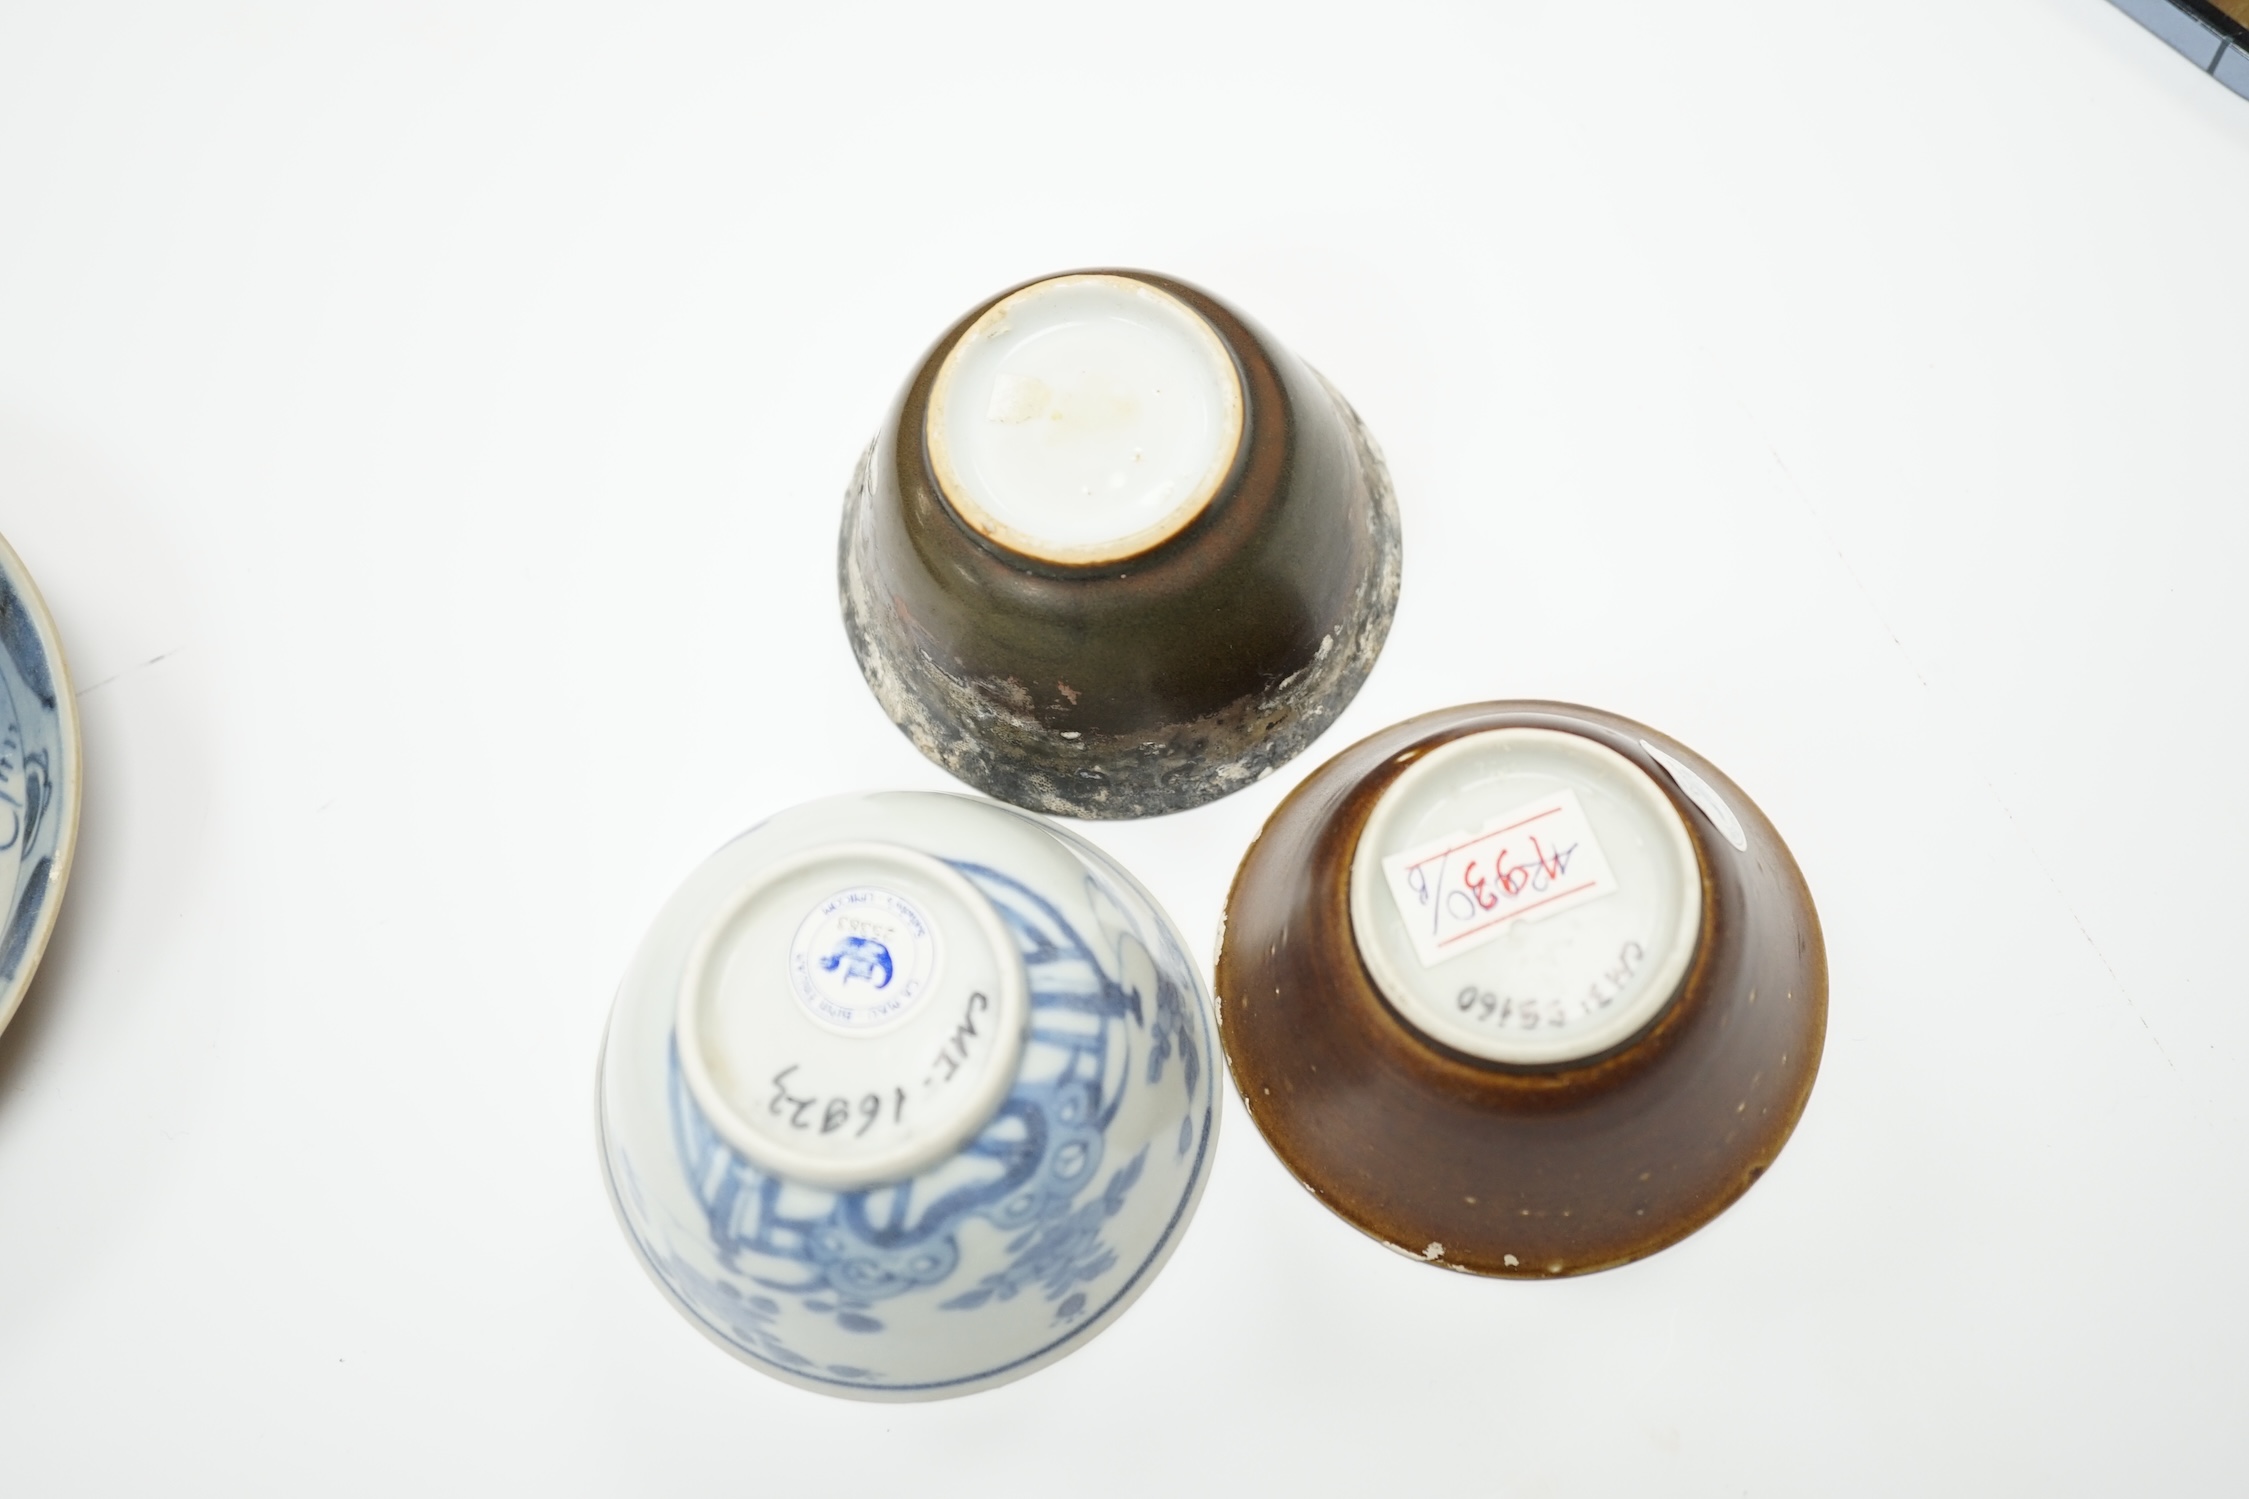 Three Chinese blue and white Ca Mau cargo teabowls and saucers, 18th century, 11.5cm diameter - Image 2 of 4